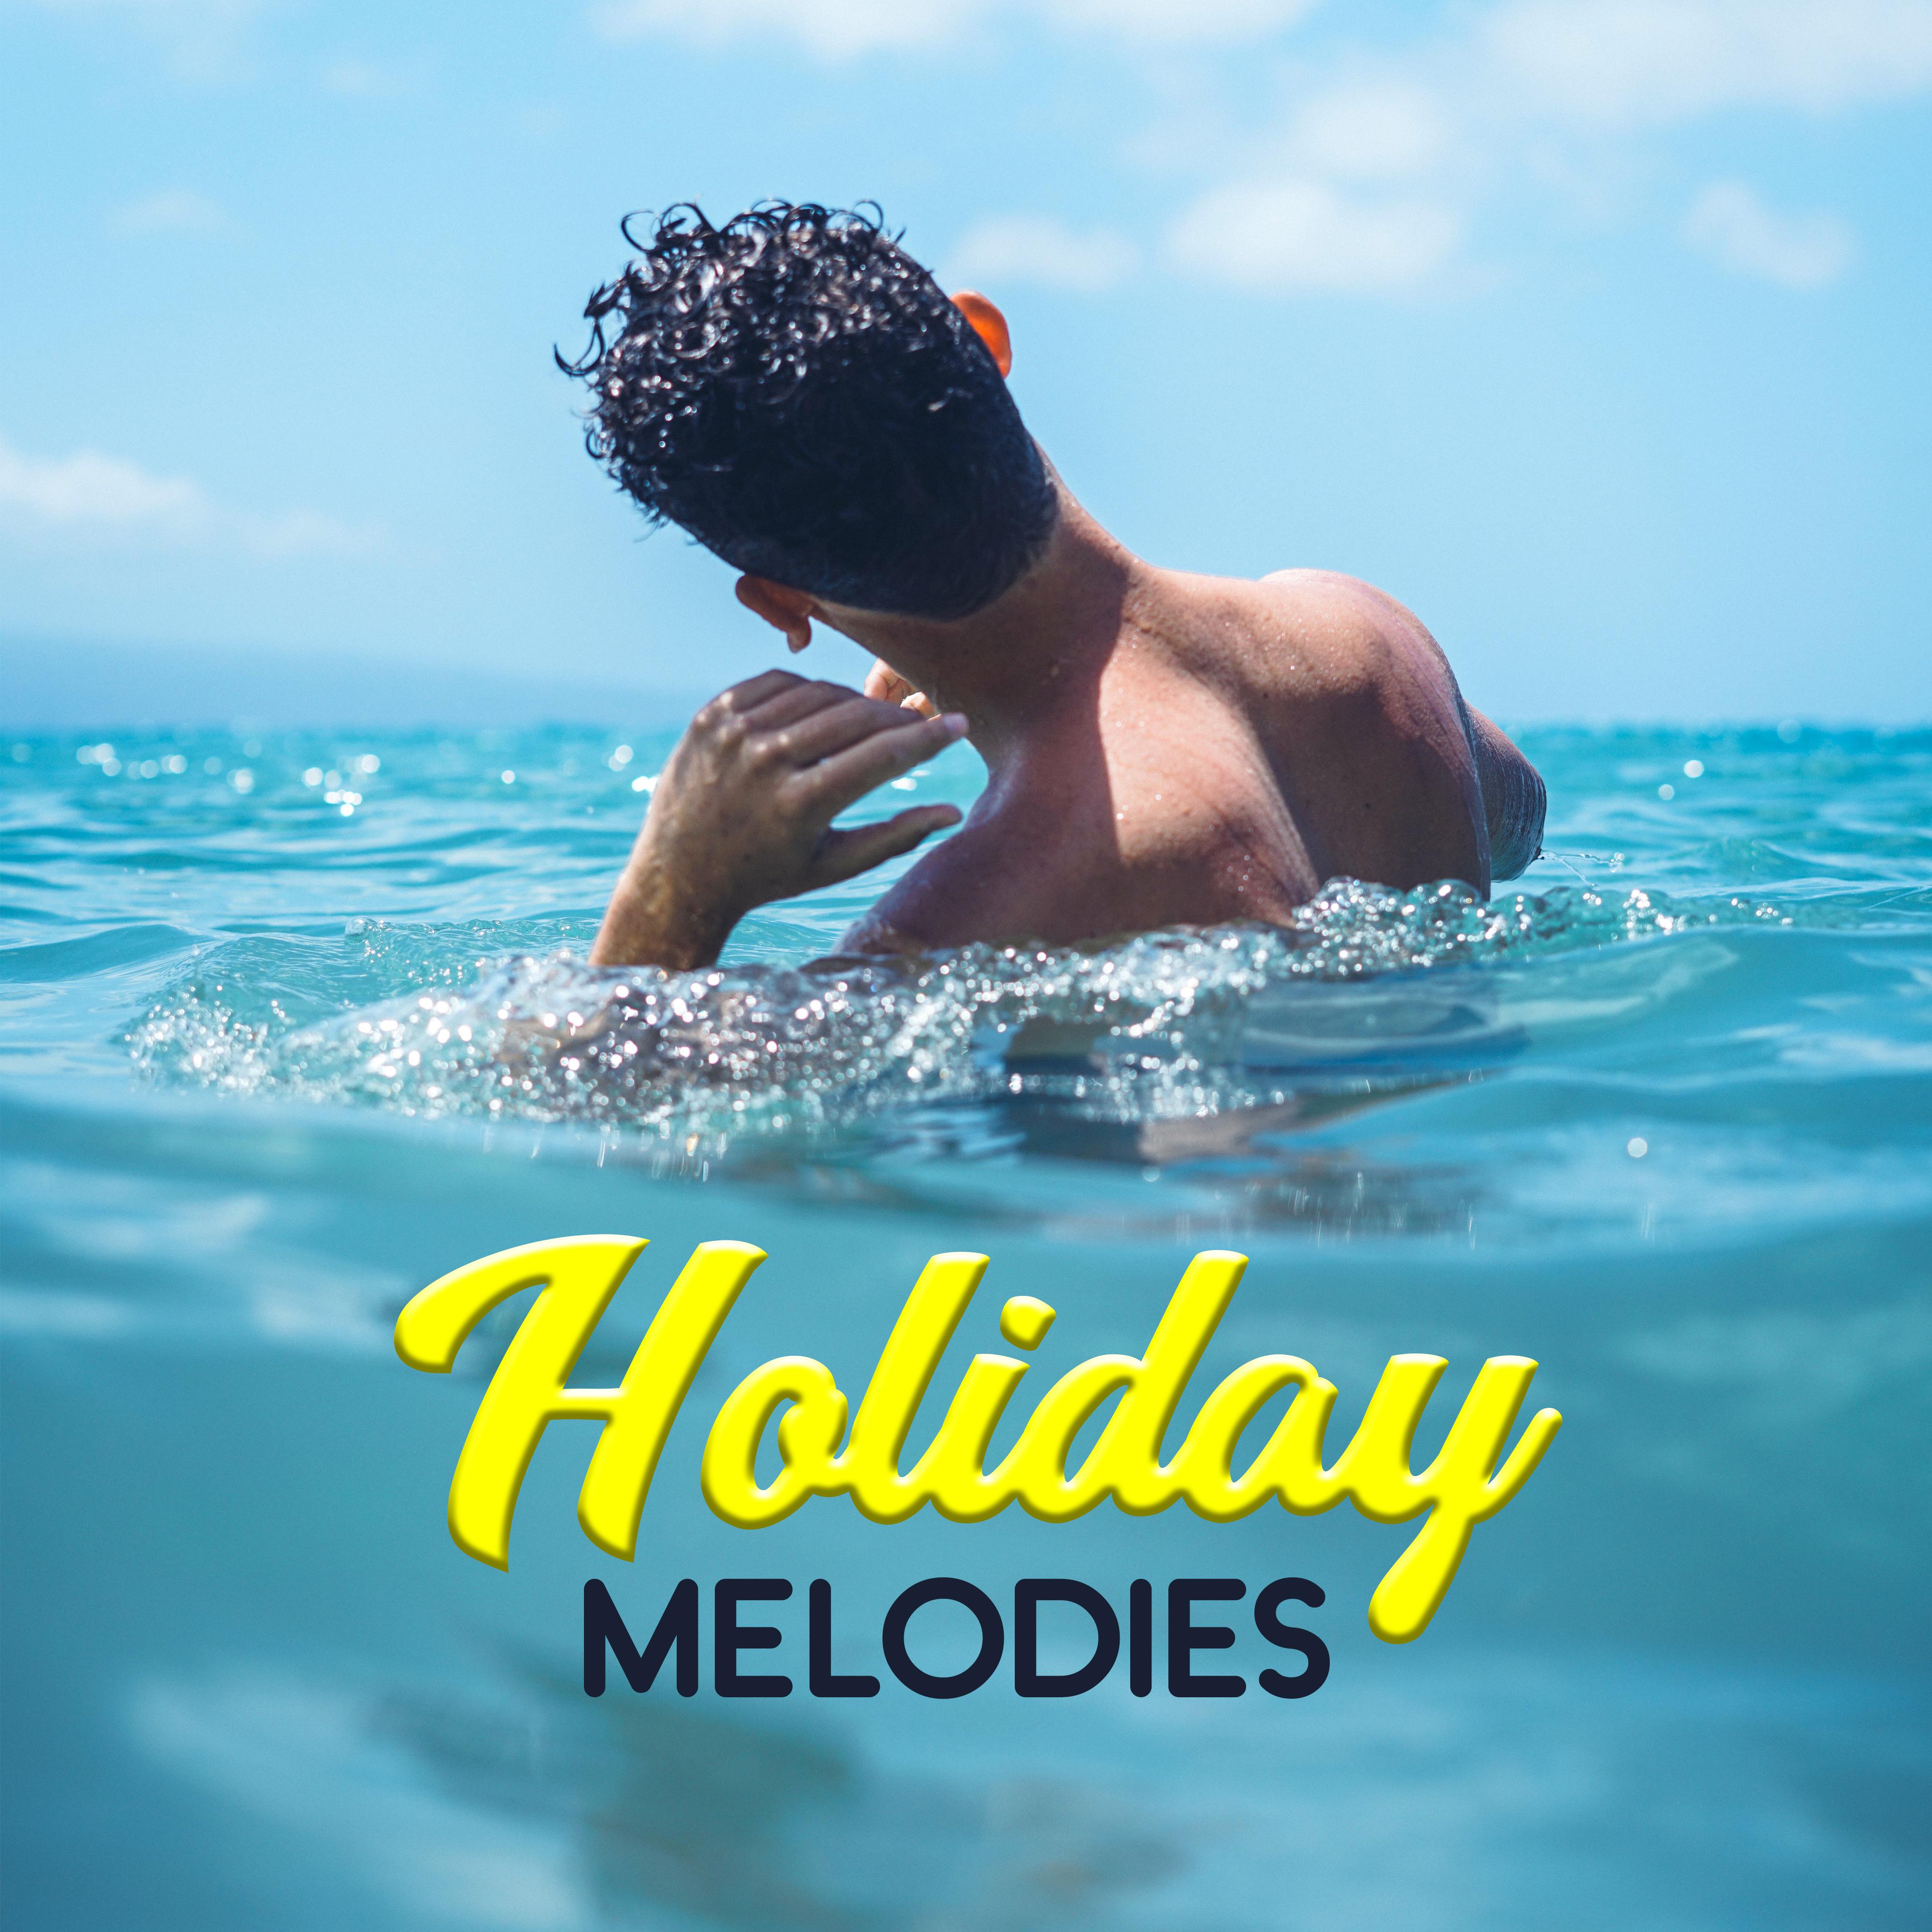 Holiday Melodies  Deep Vibes Only, Beach Party, Holiday Chill, Good Mood, Energy for Mind